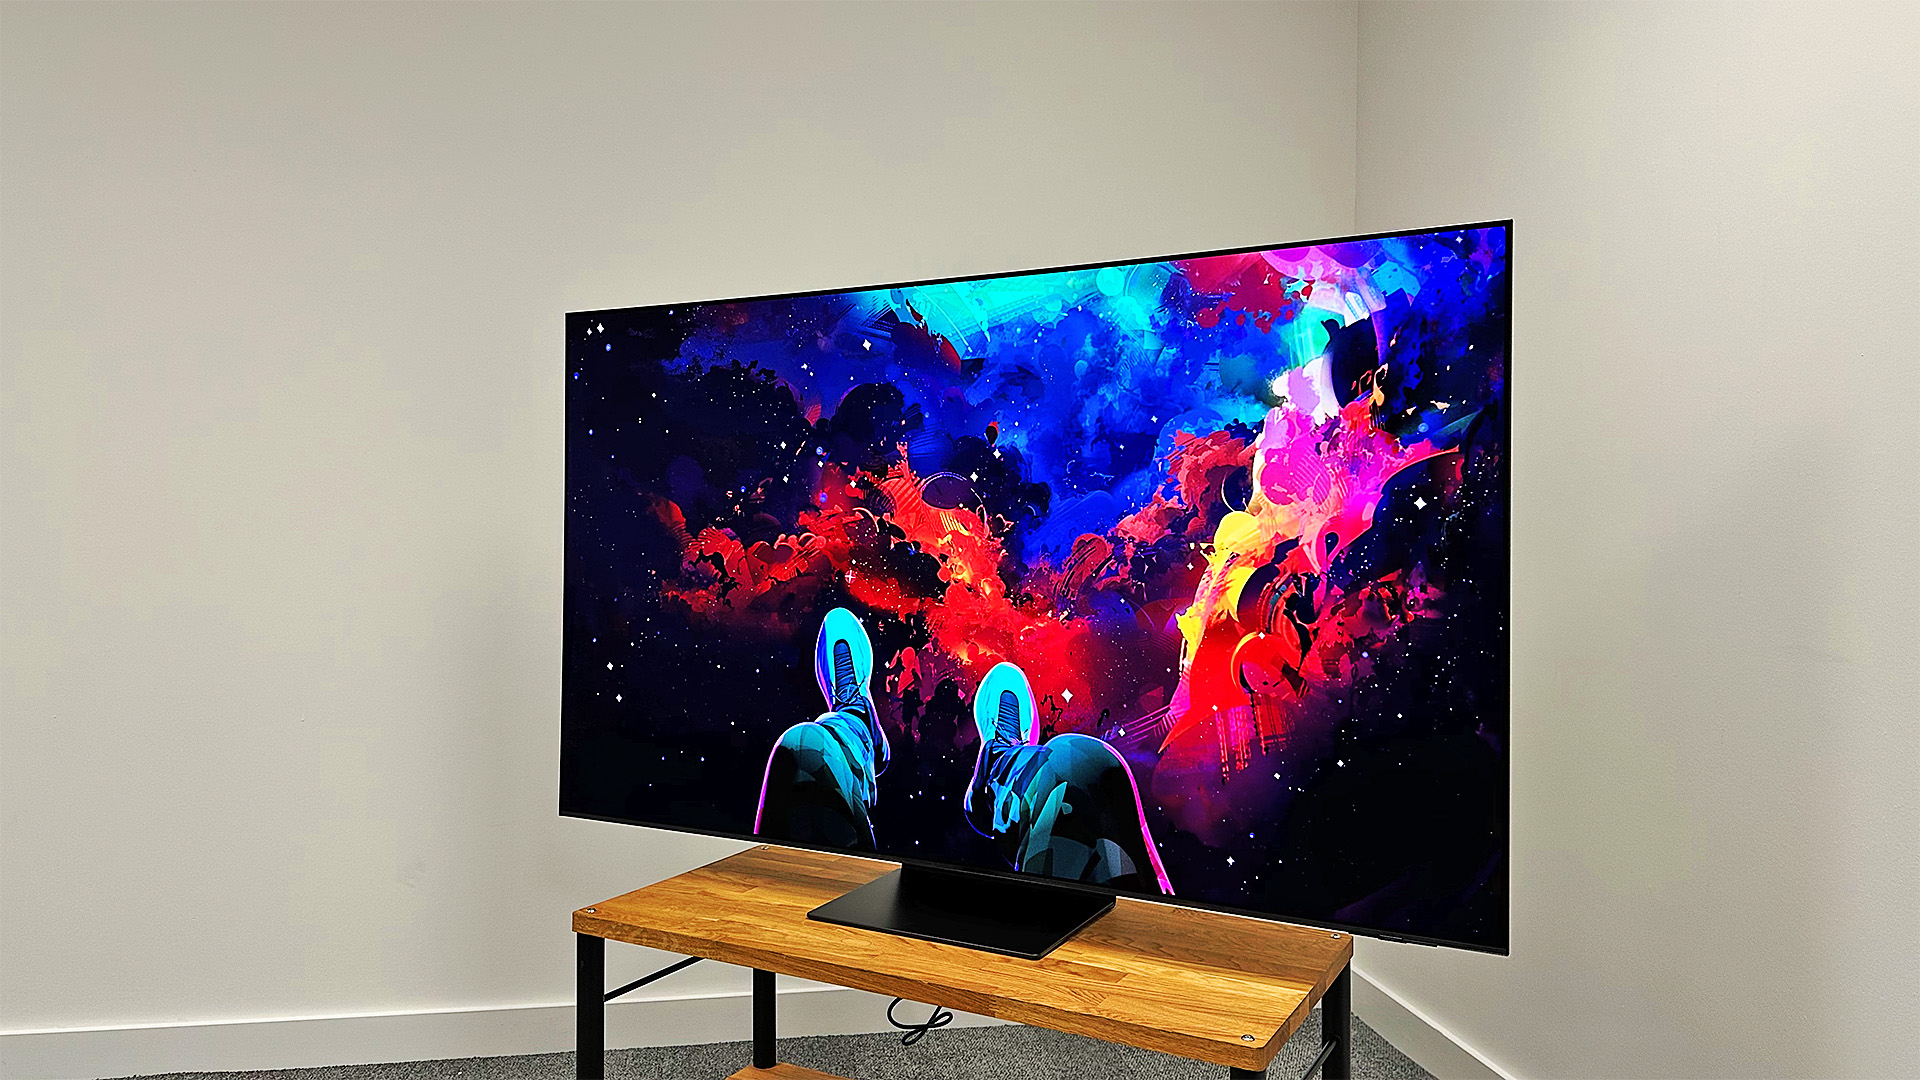 Samsung Q7C 4K UHD TV Review: An LCD Television With Great 4K Picture  Quality